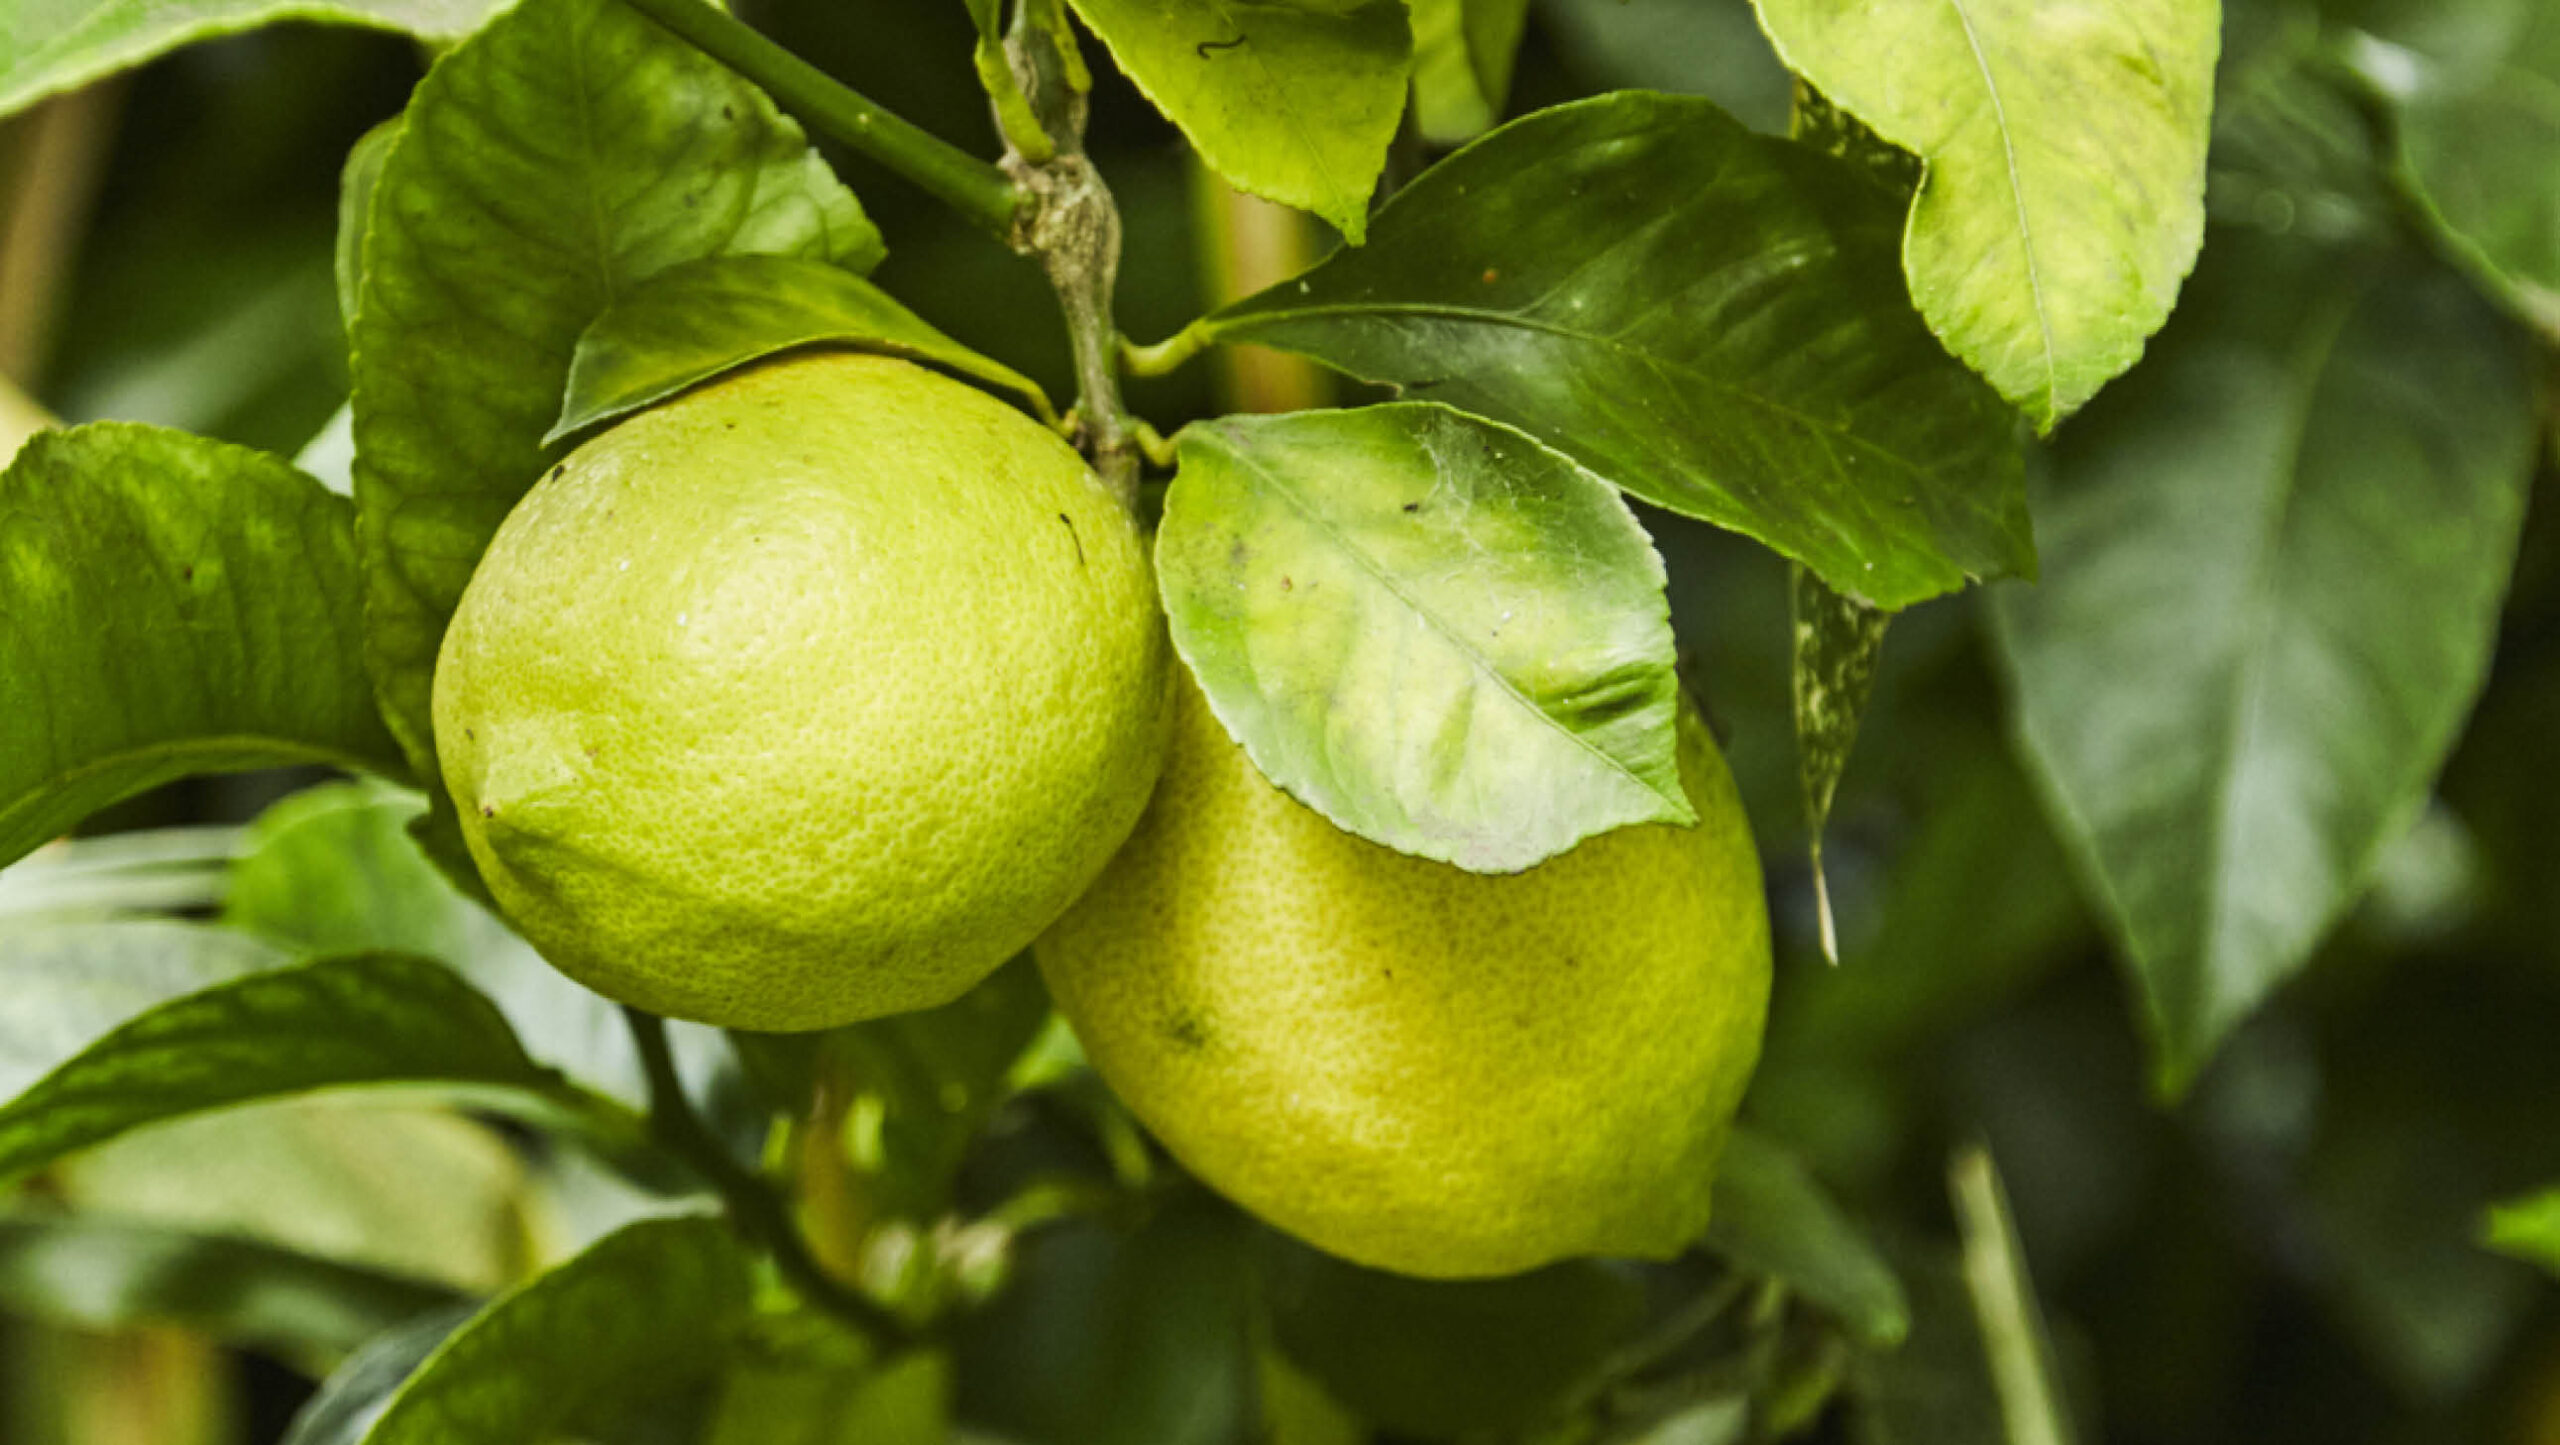 Picking your own fruit fresh from a tree is one of the top gardening joys.